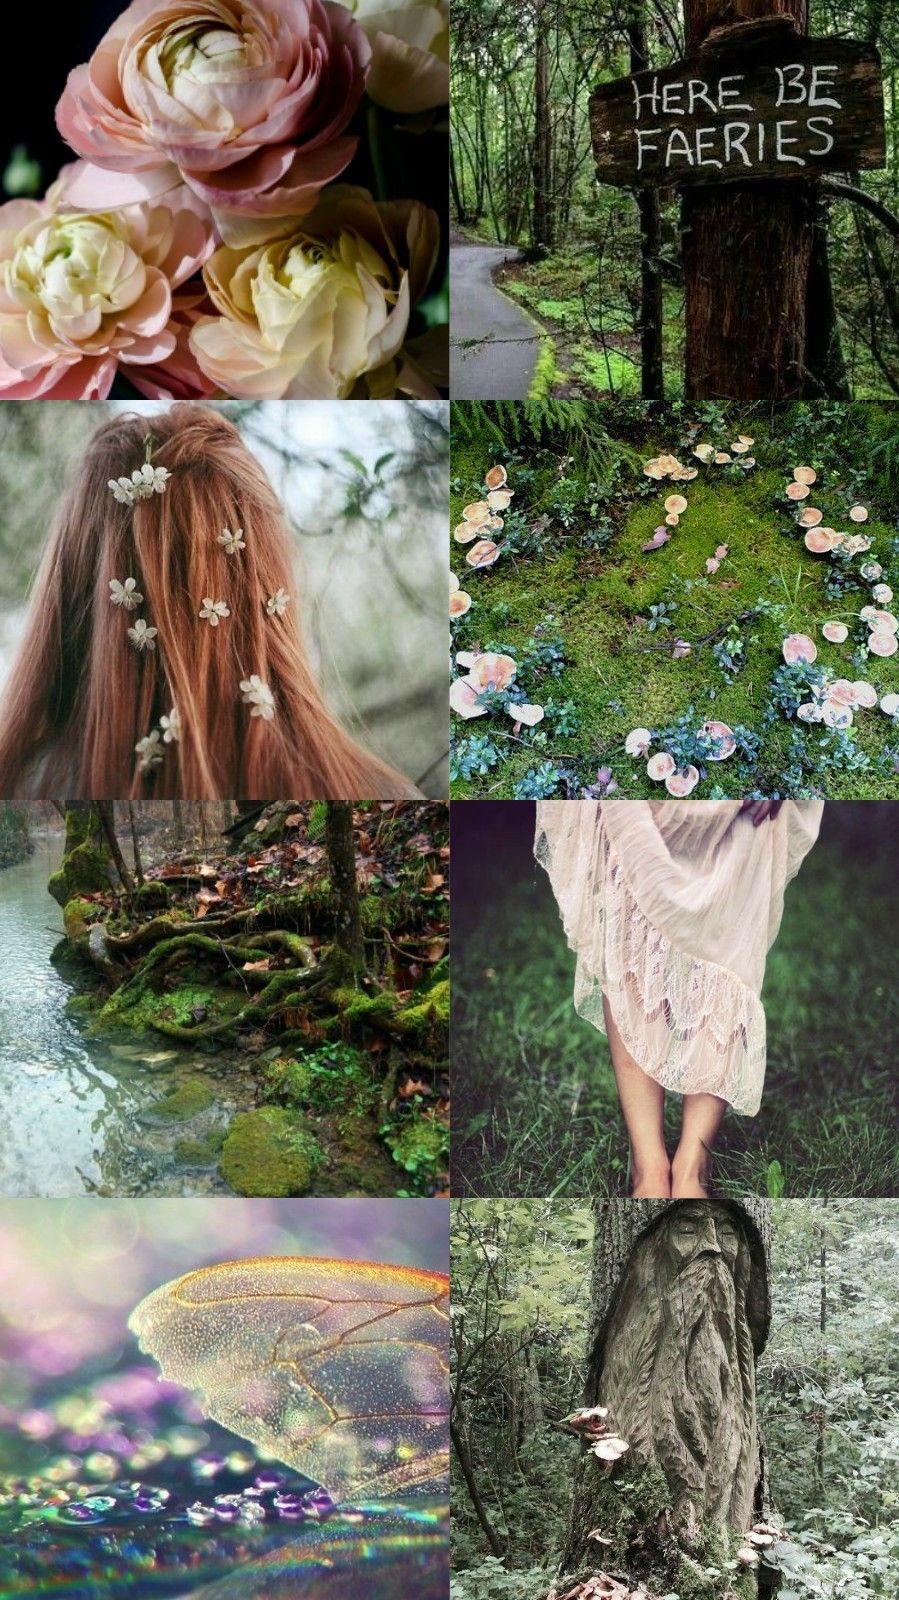 Collage of photos with flowers, moss, a fairy, and a tree stump - Forest